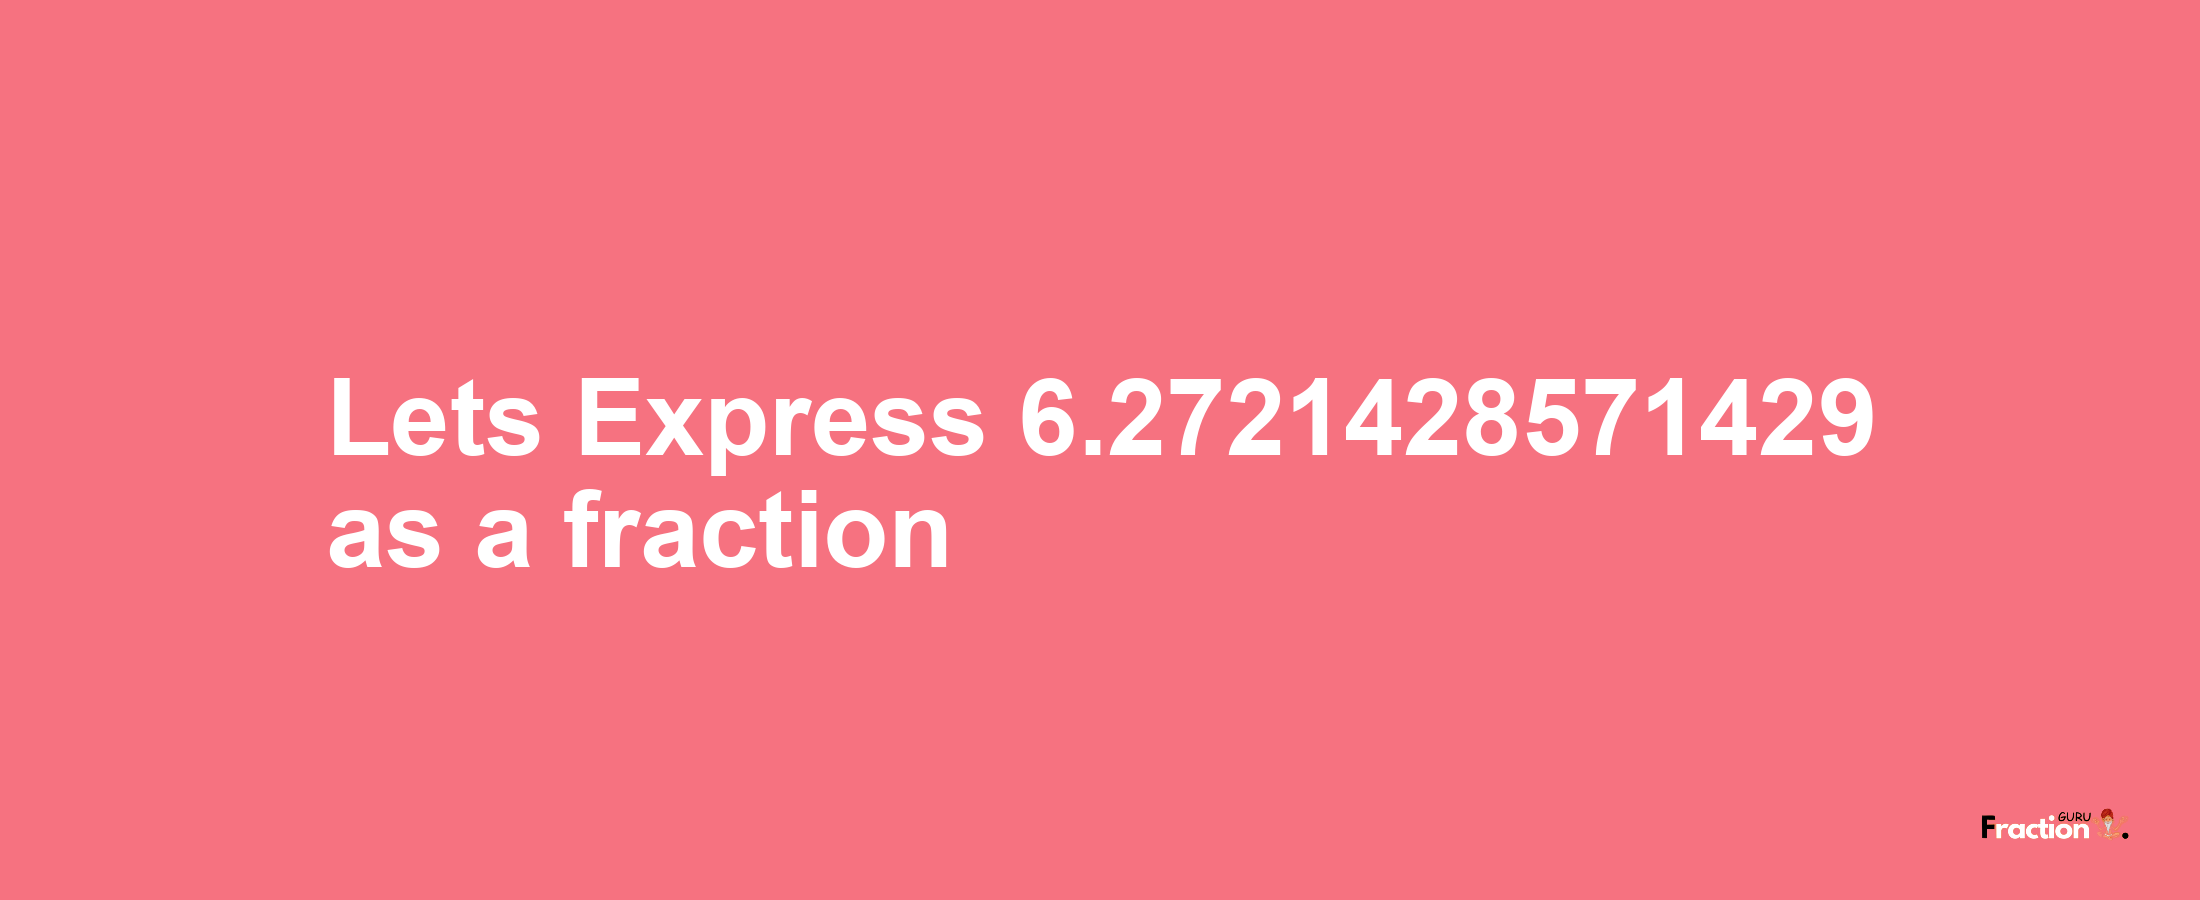 Lets Express 6.2721428571429 as afraction